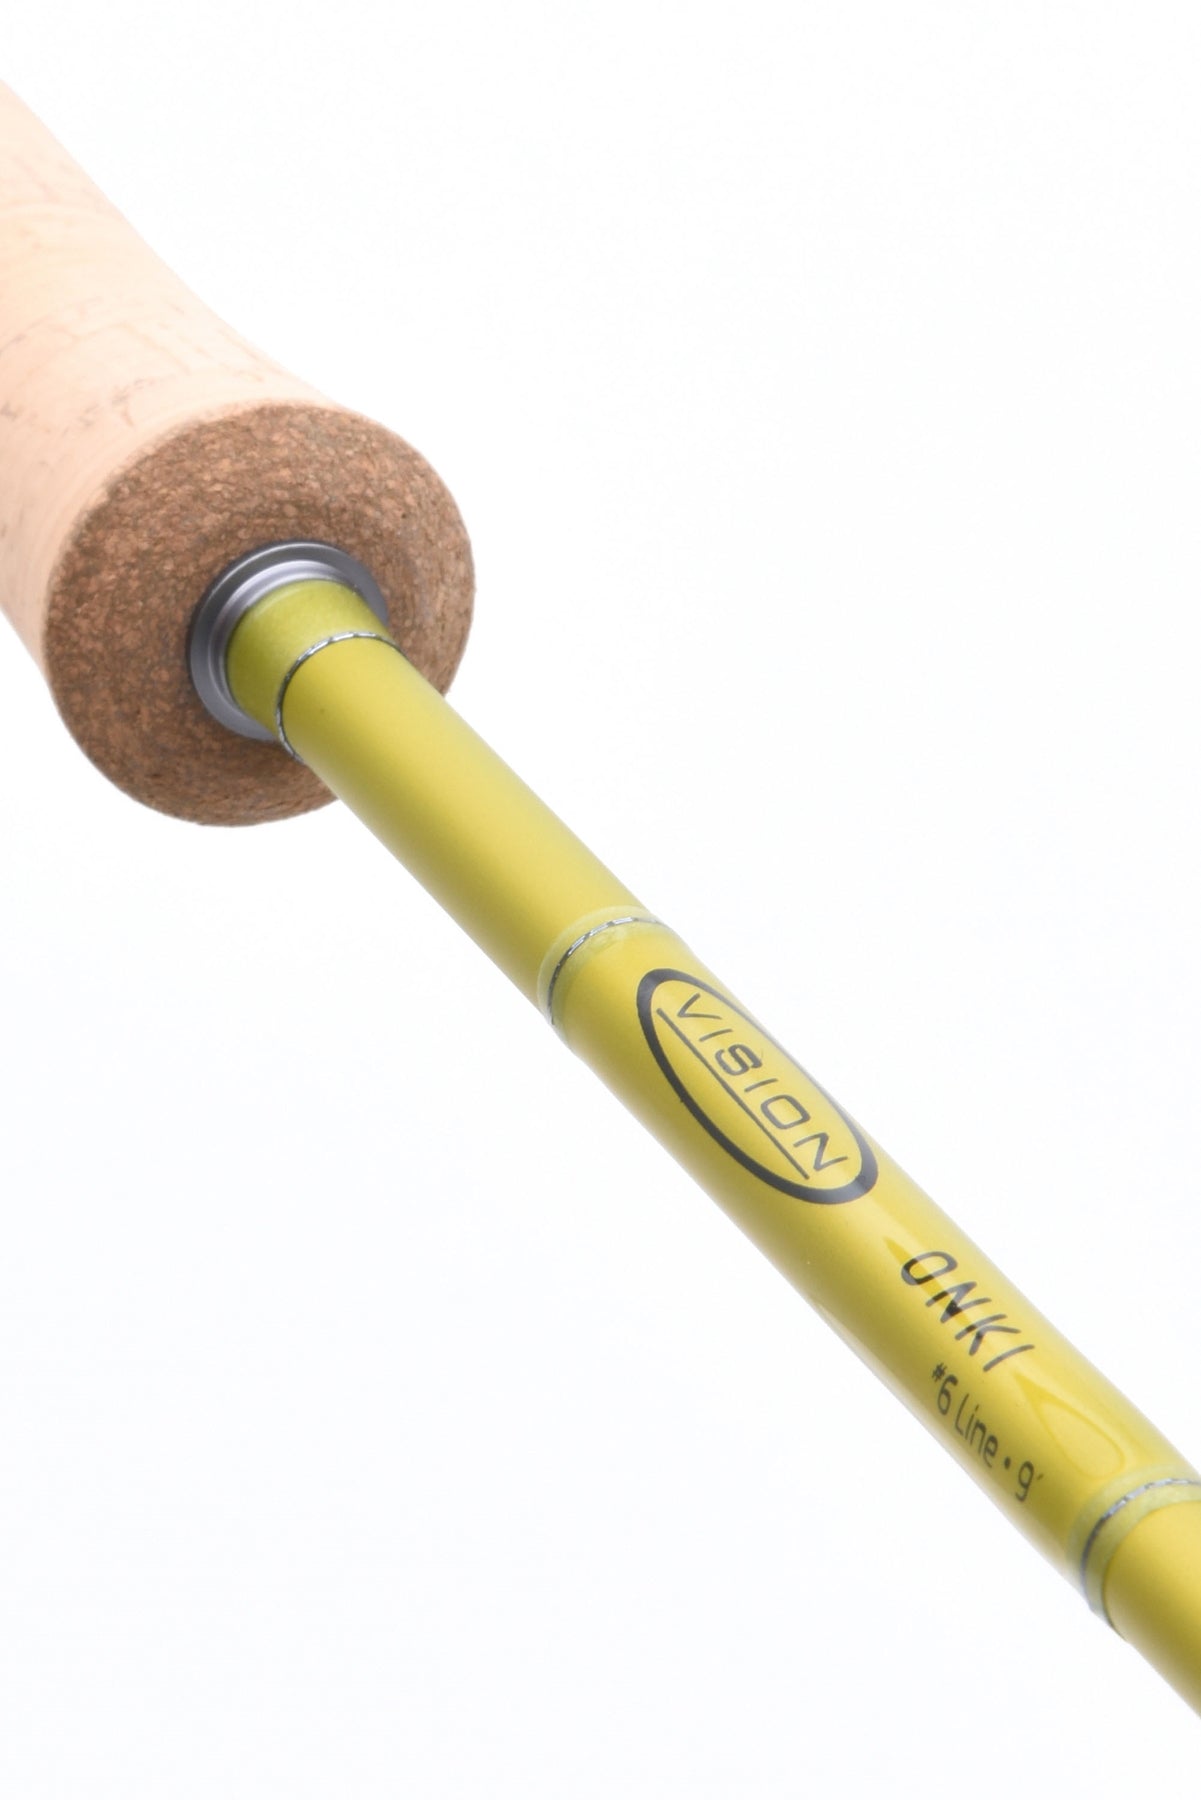 VISION ONKI FLY RODS  - SAVE £100 OFF RRP!